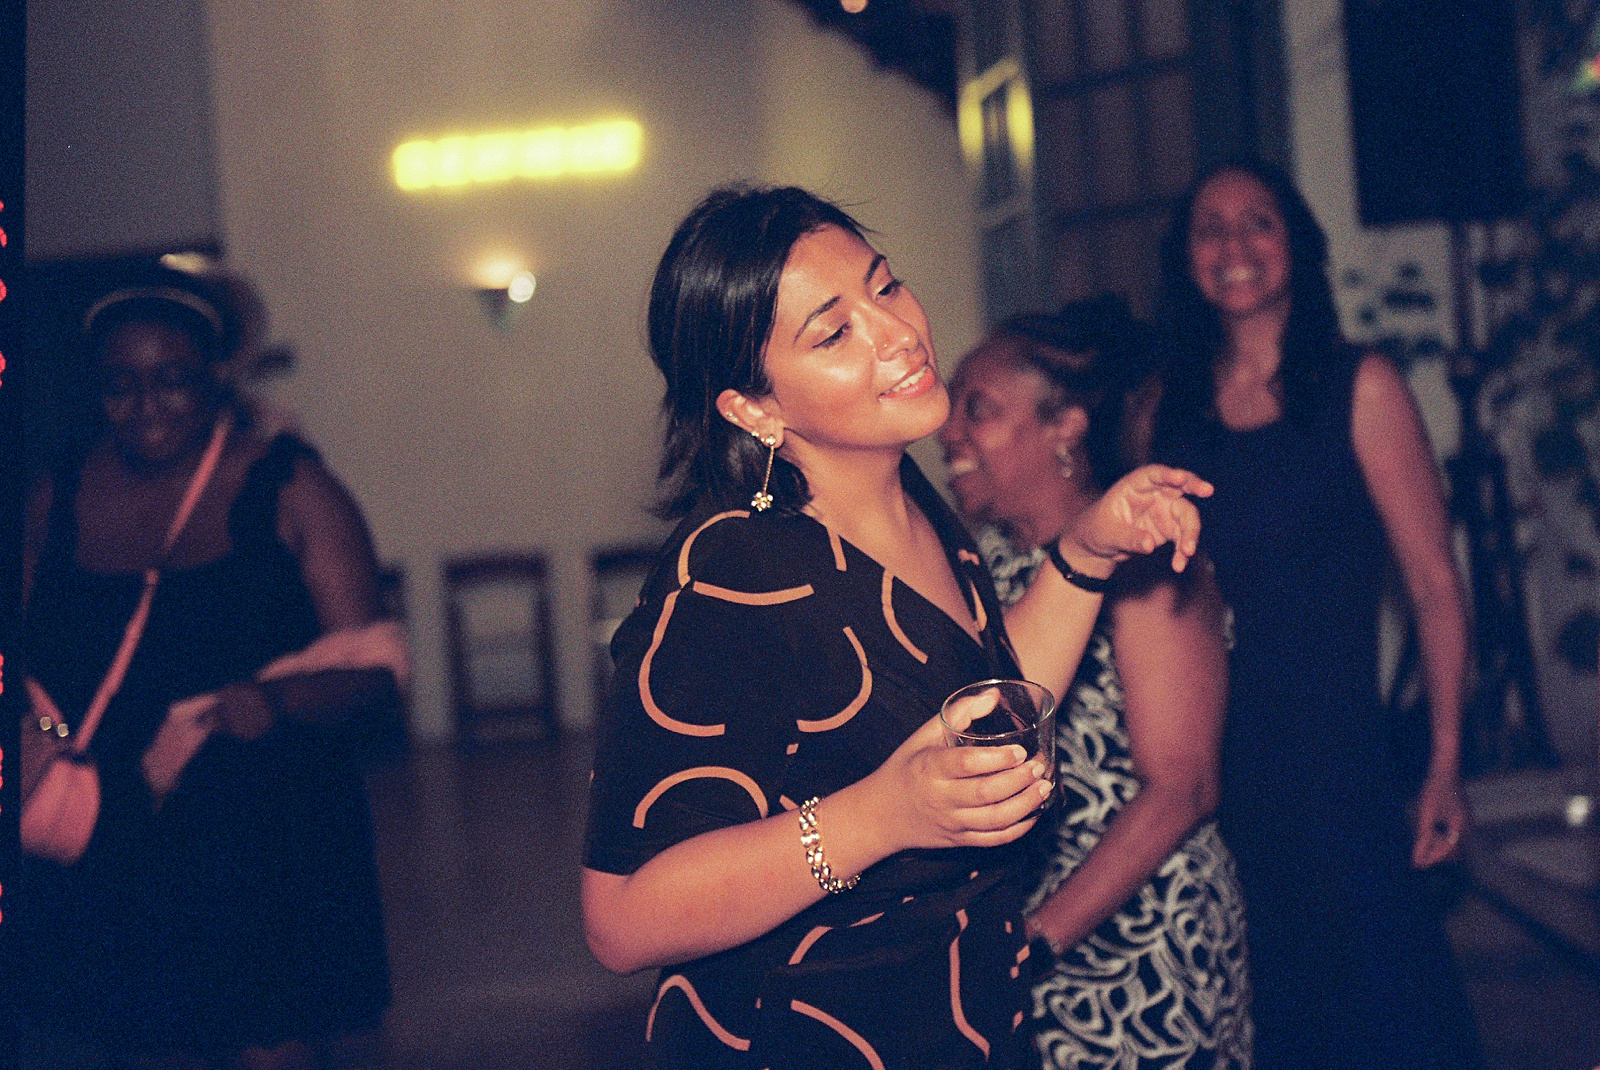 A wedding guest dances and smiles.